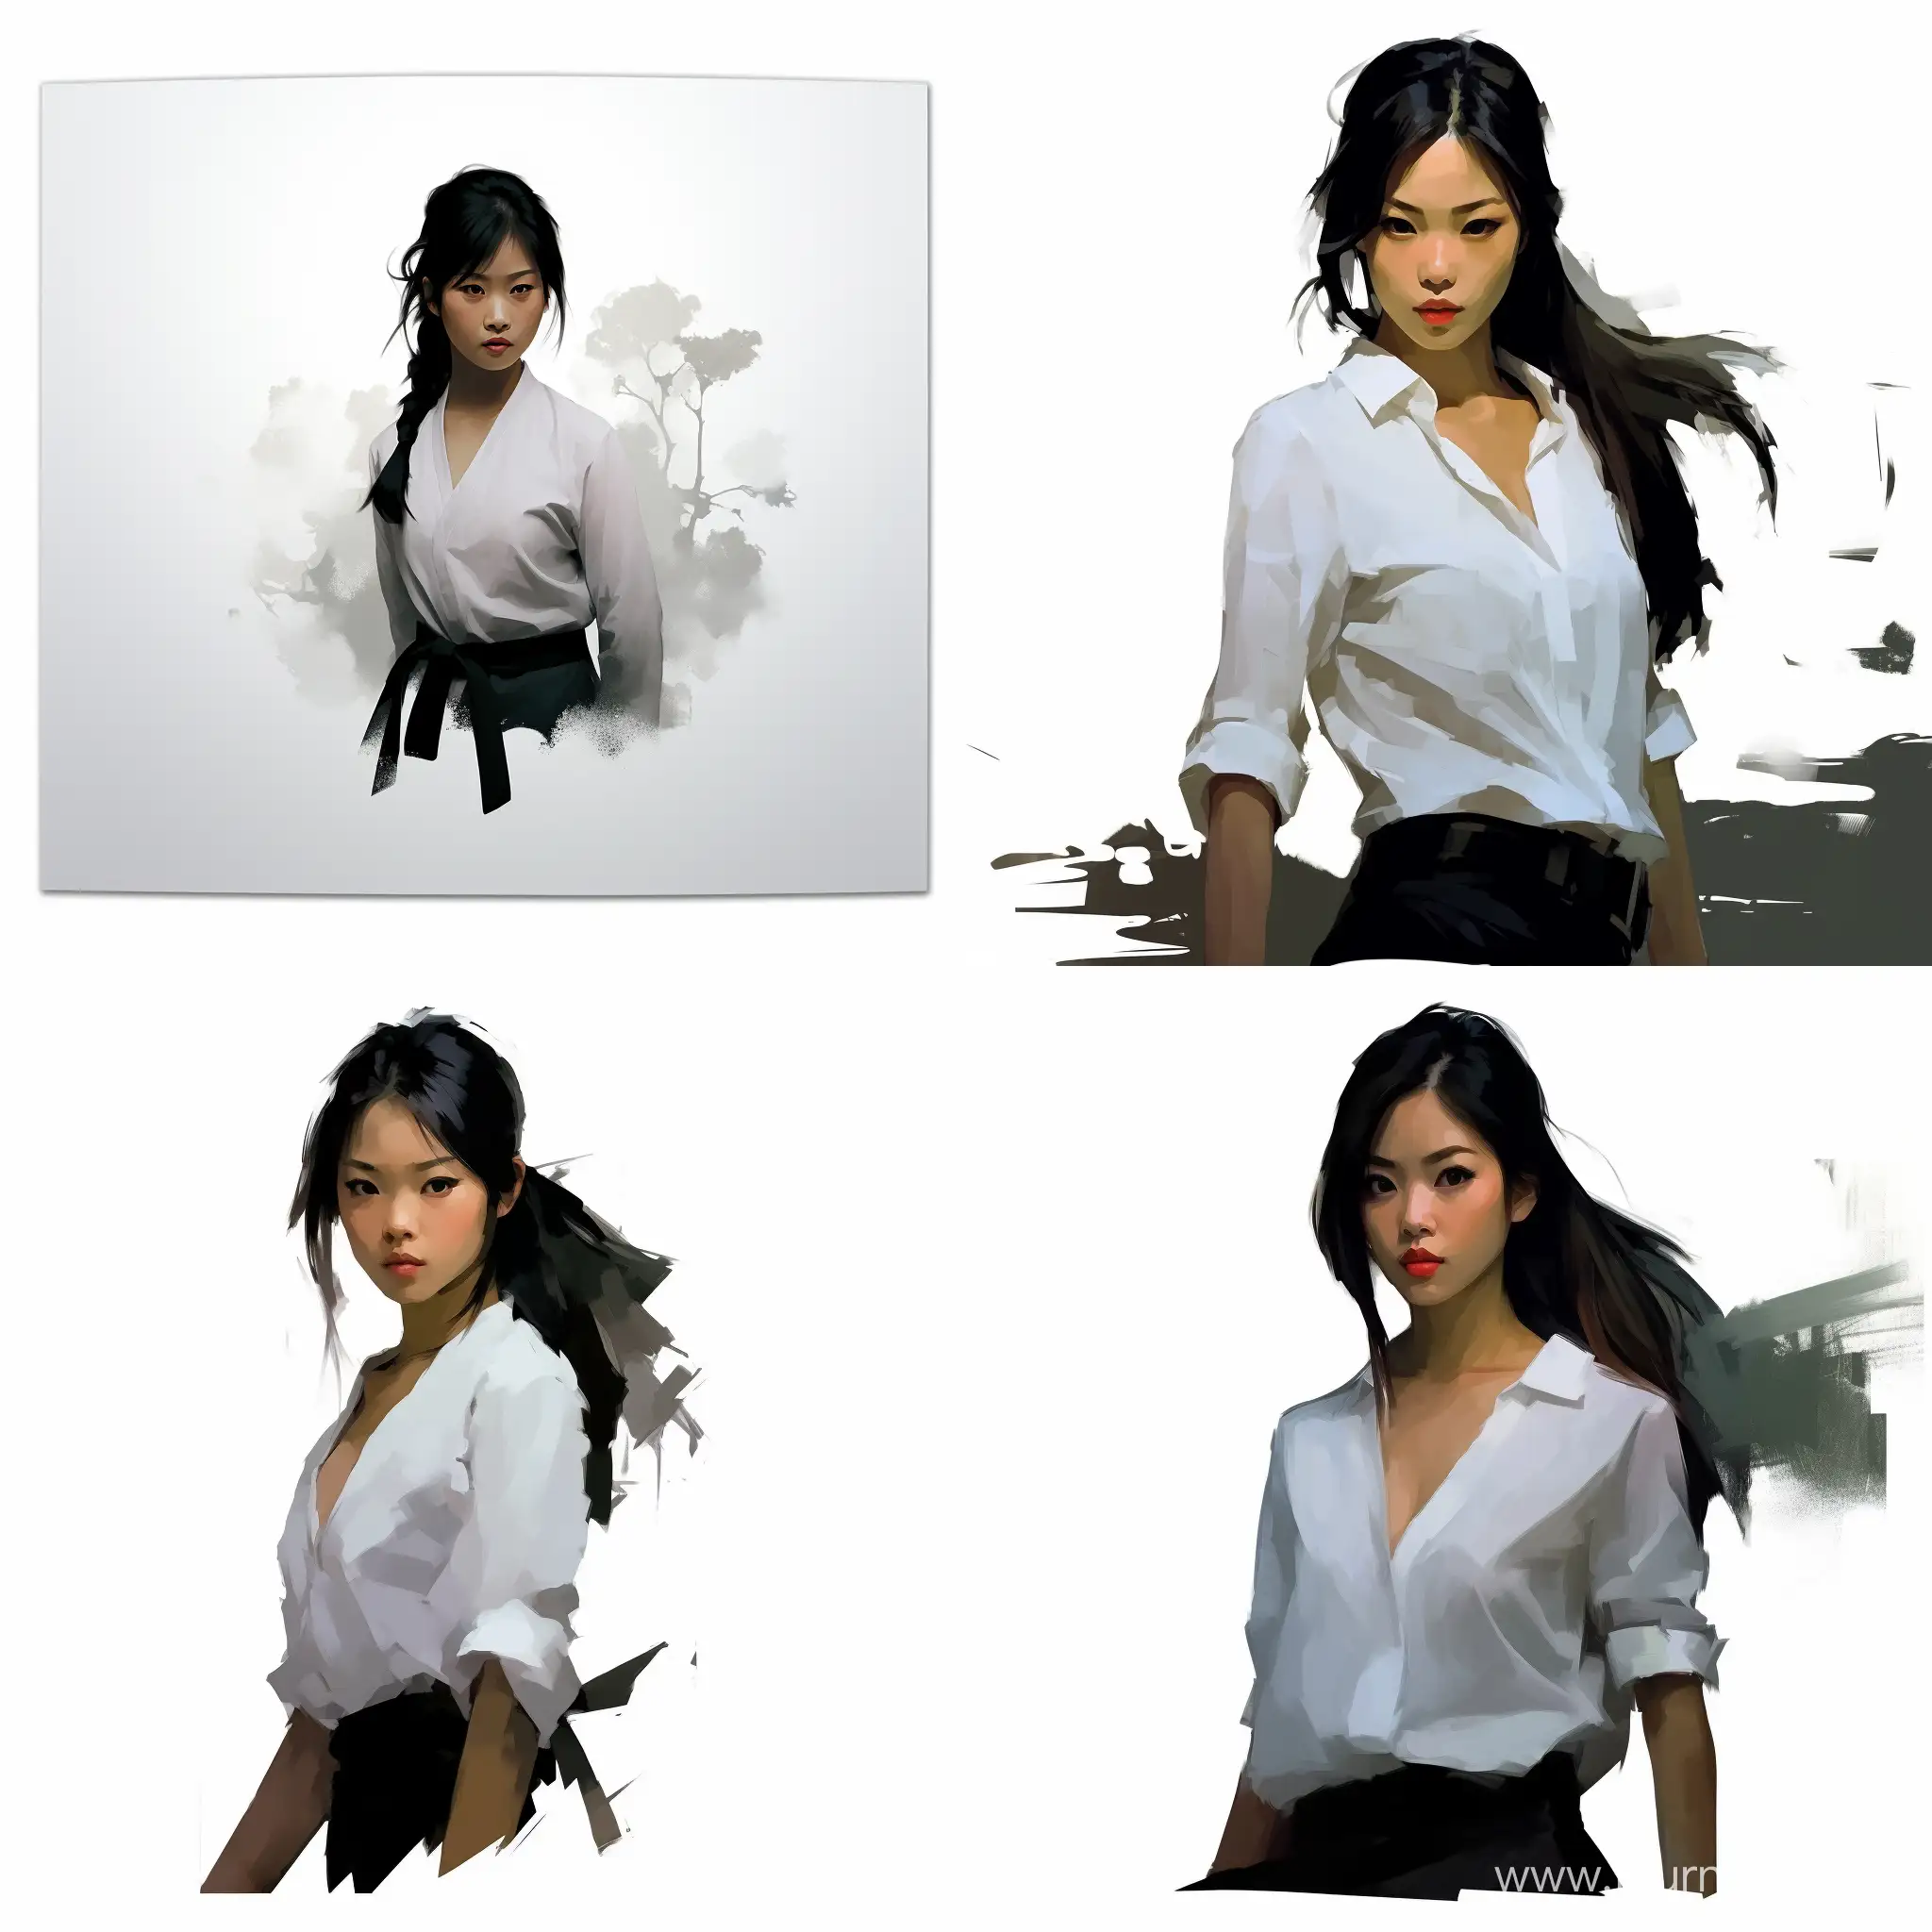 Asian-Girl-in-White-Shirt-with-GSI-Design-Fashionable-11-Aspect-Ratio-Image